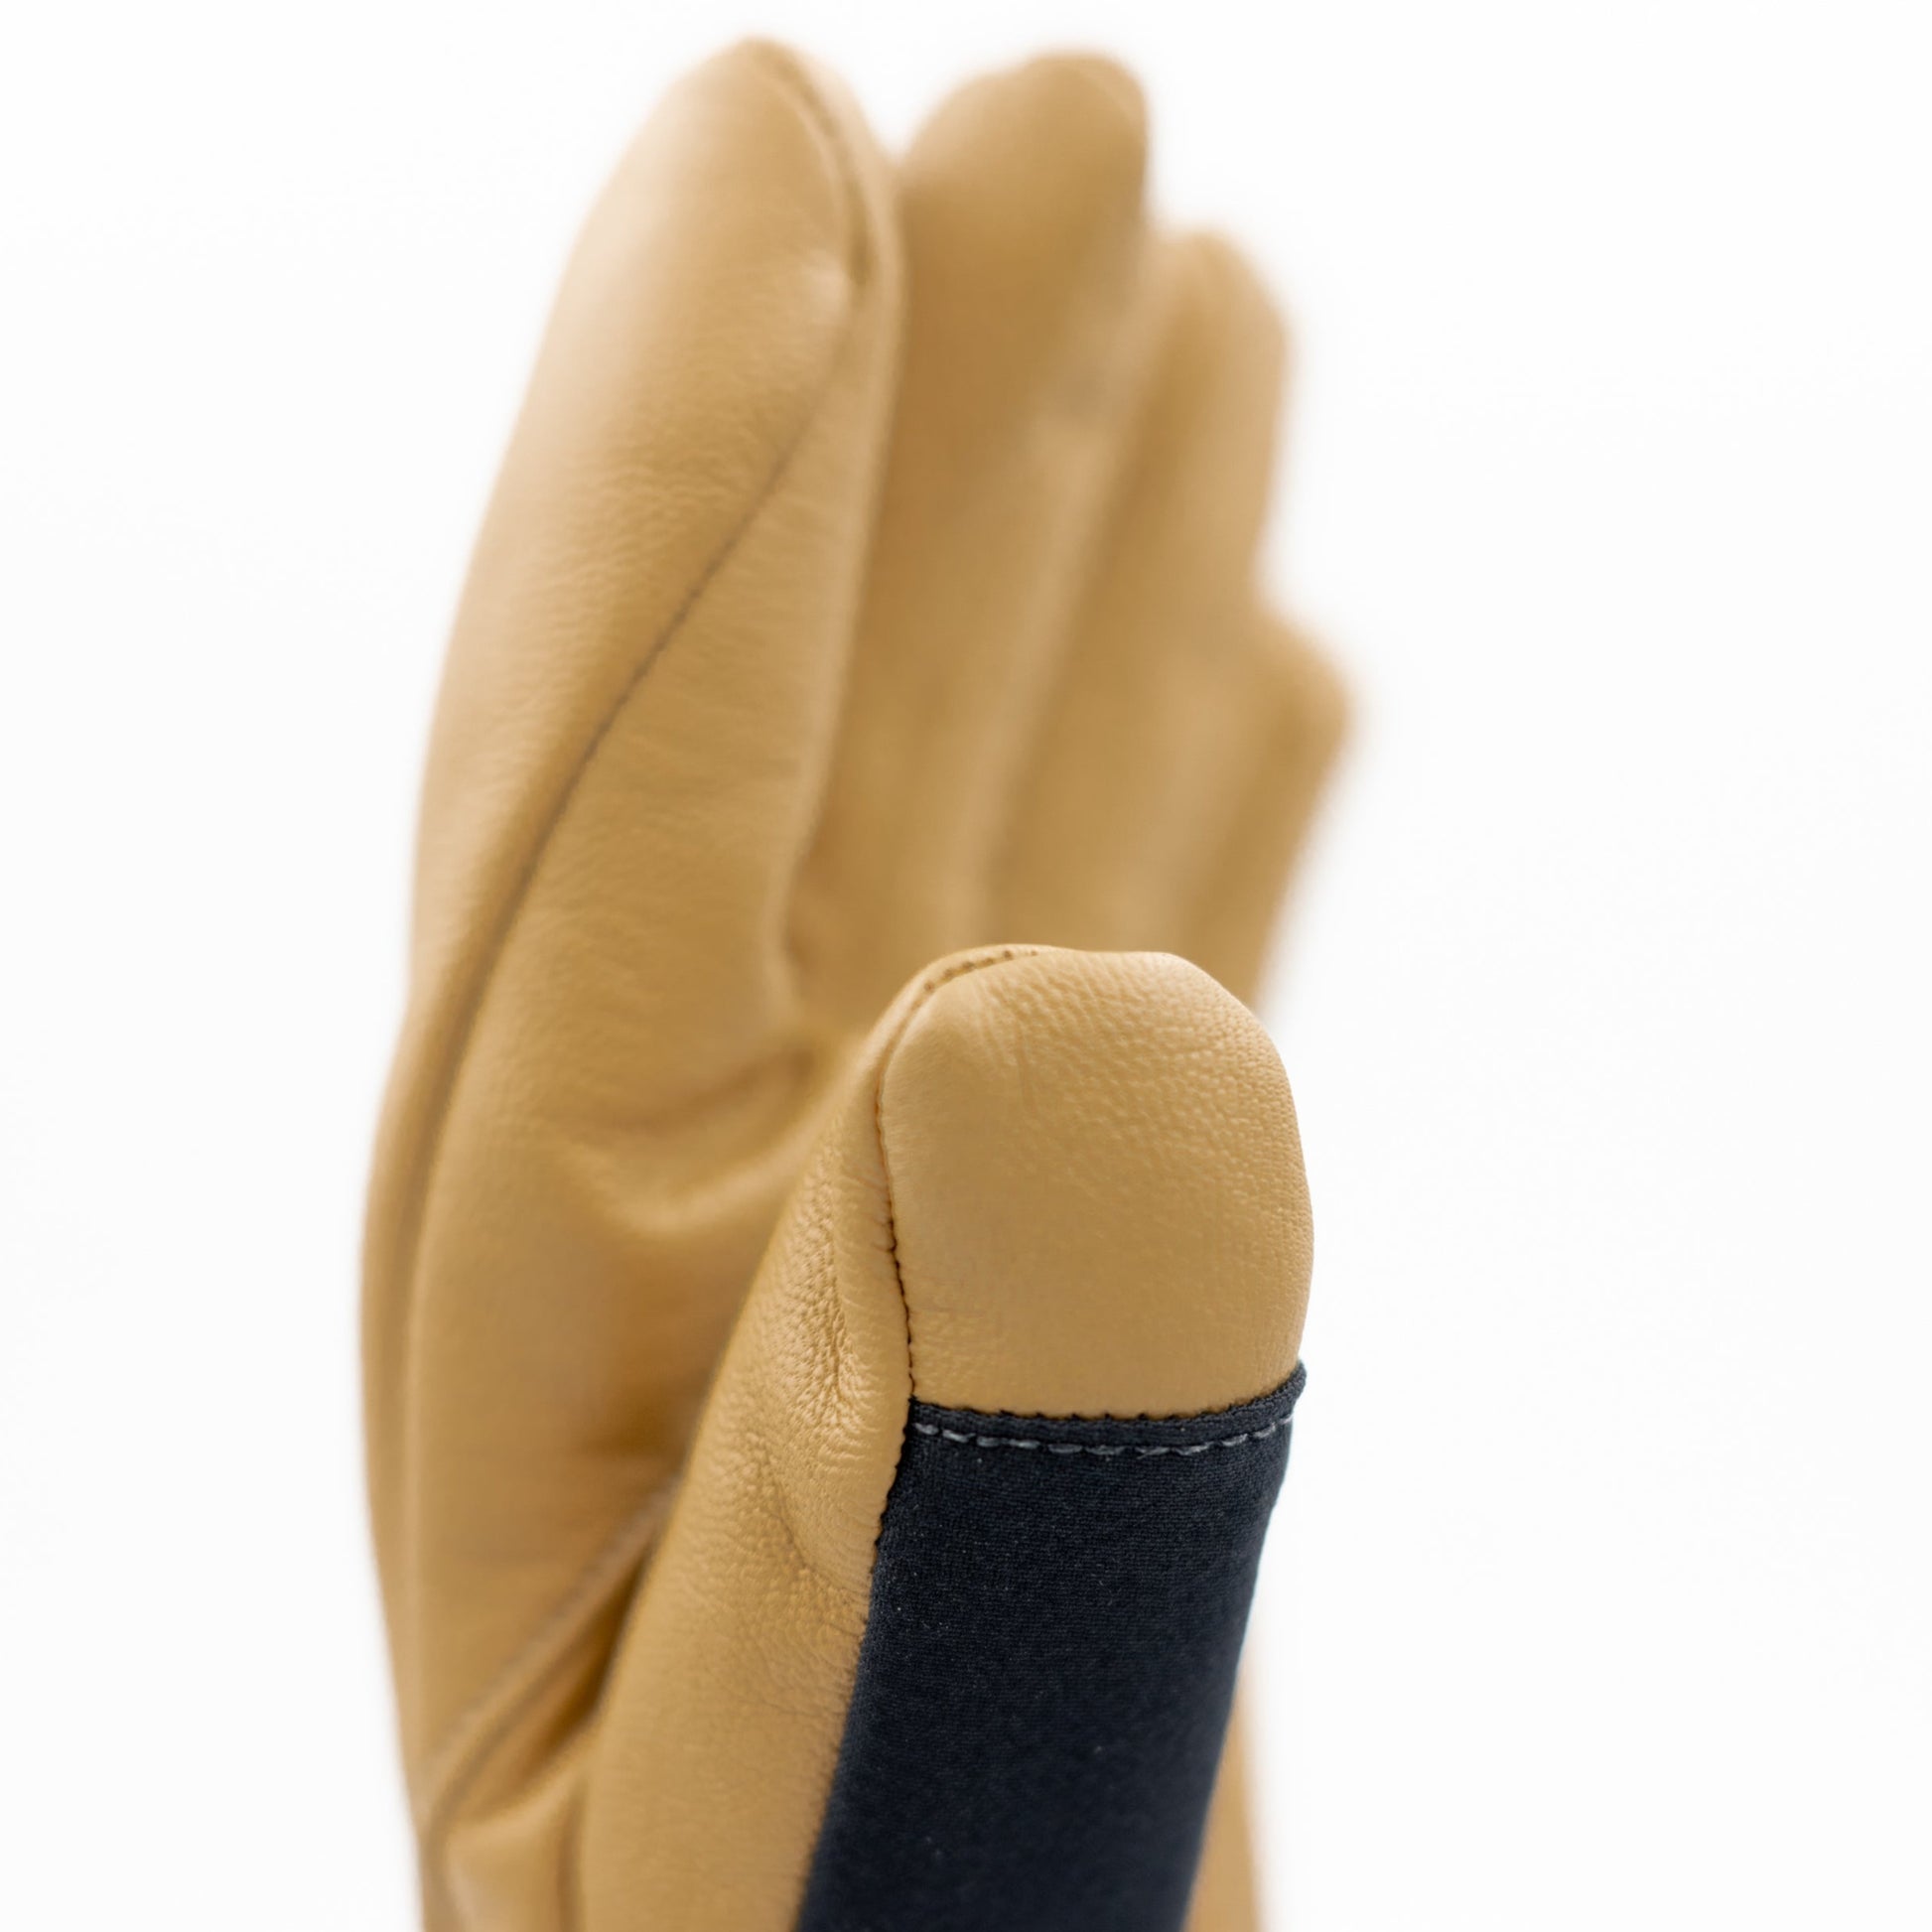 A pair of tan Mainers Rangeley Gloves on a white background.